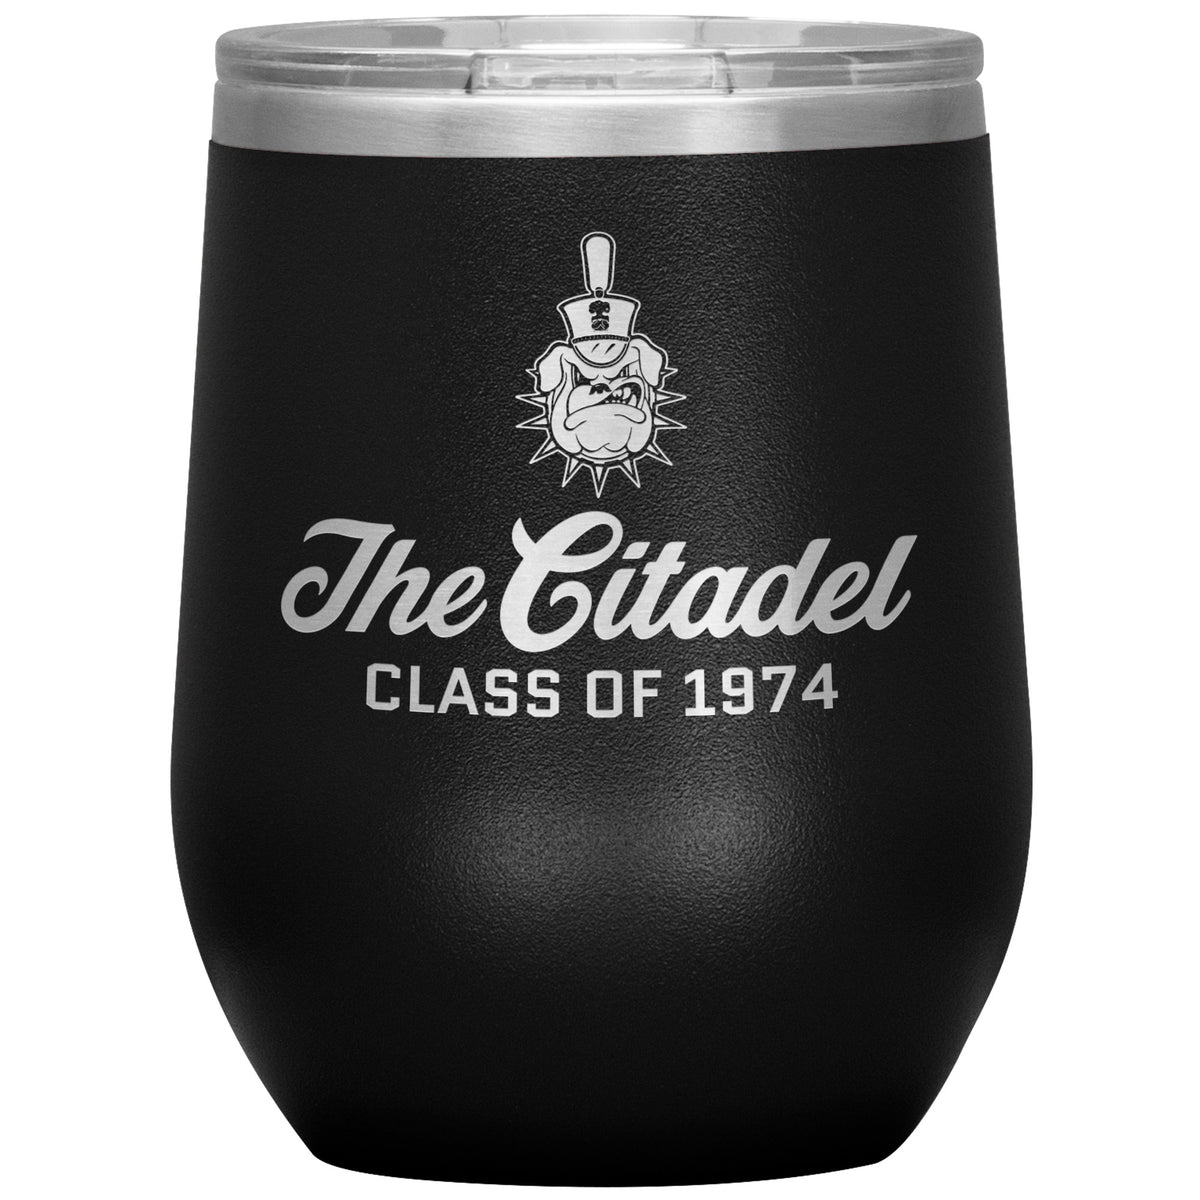 The Citadel Spike, Class of 1974, Wine Insulated Tumbler - 12oz